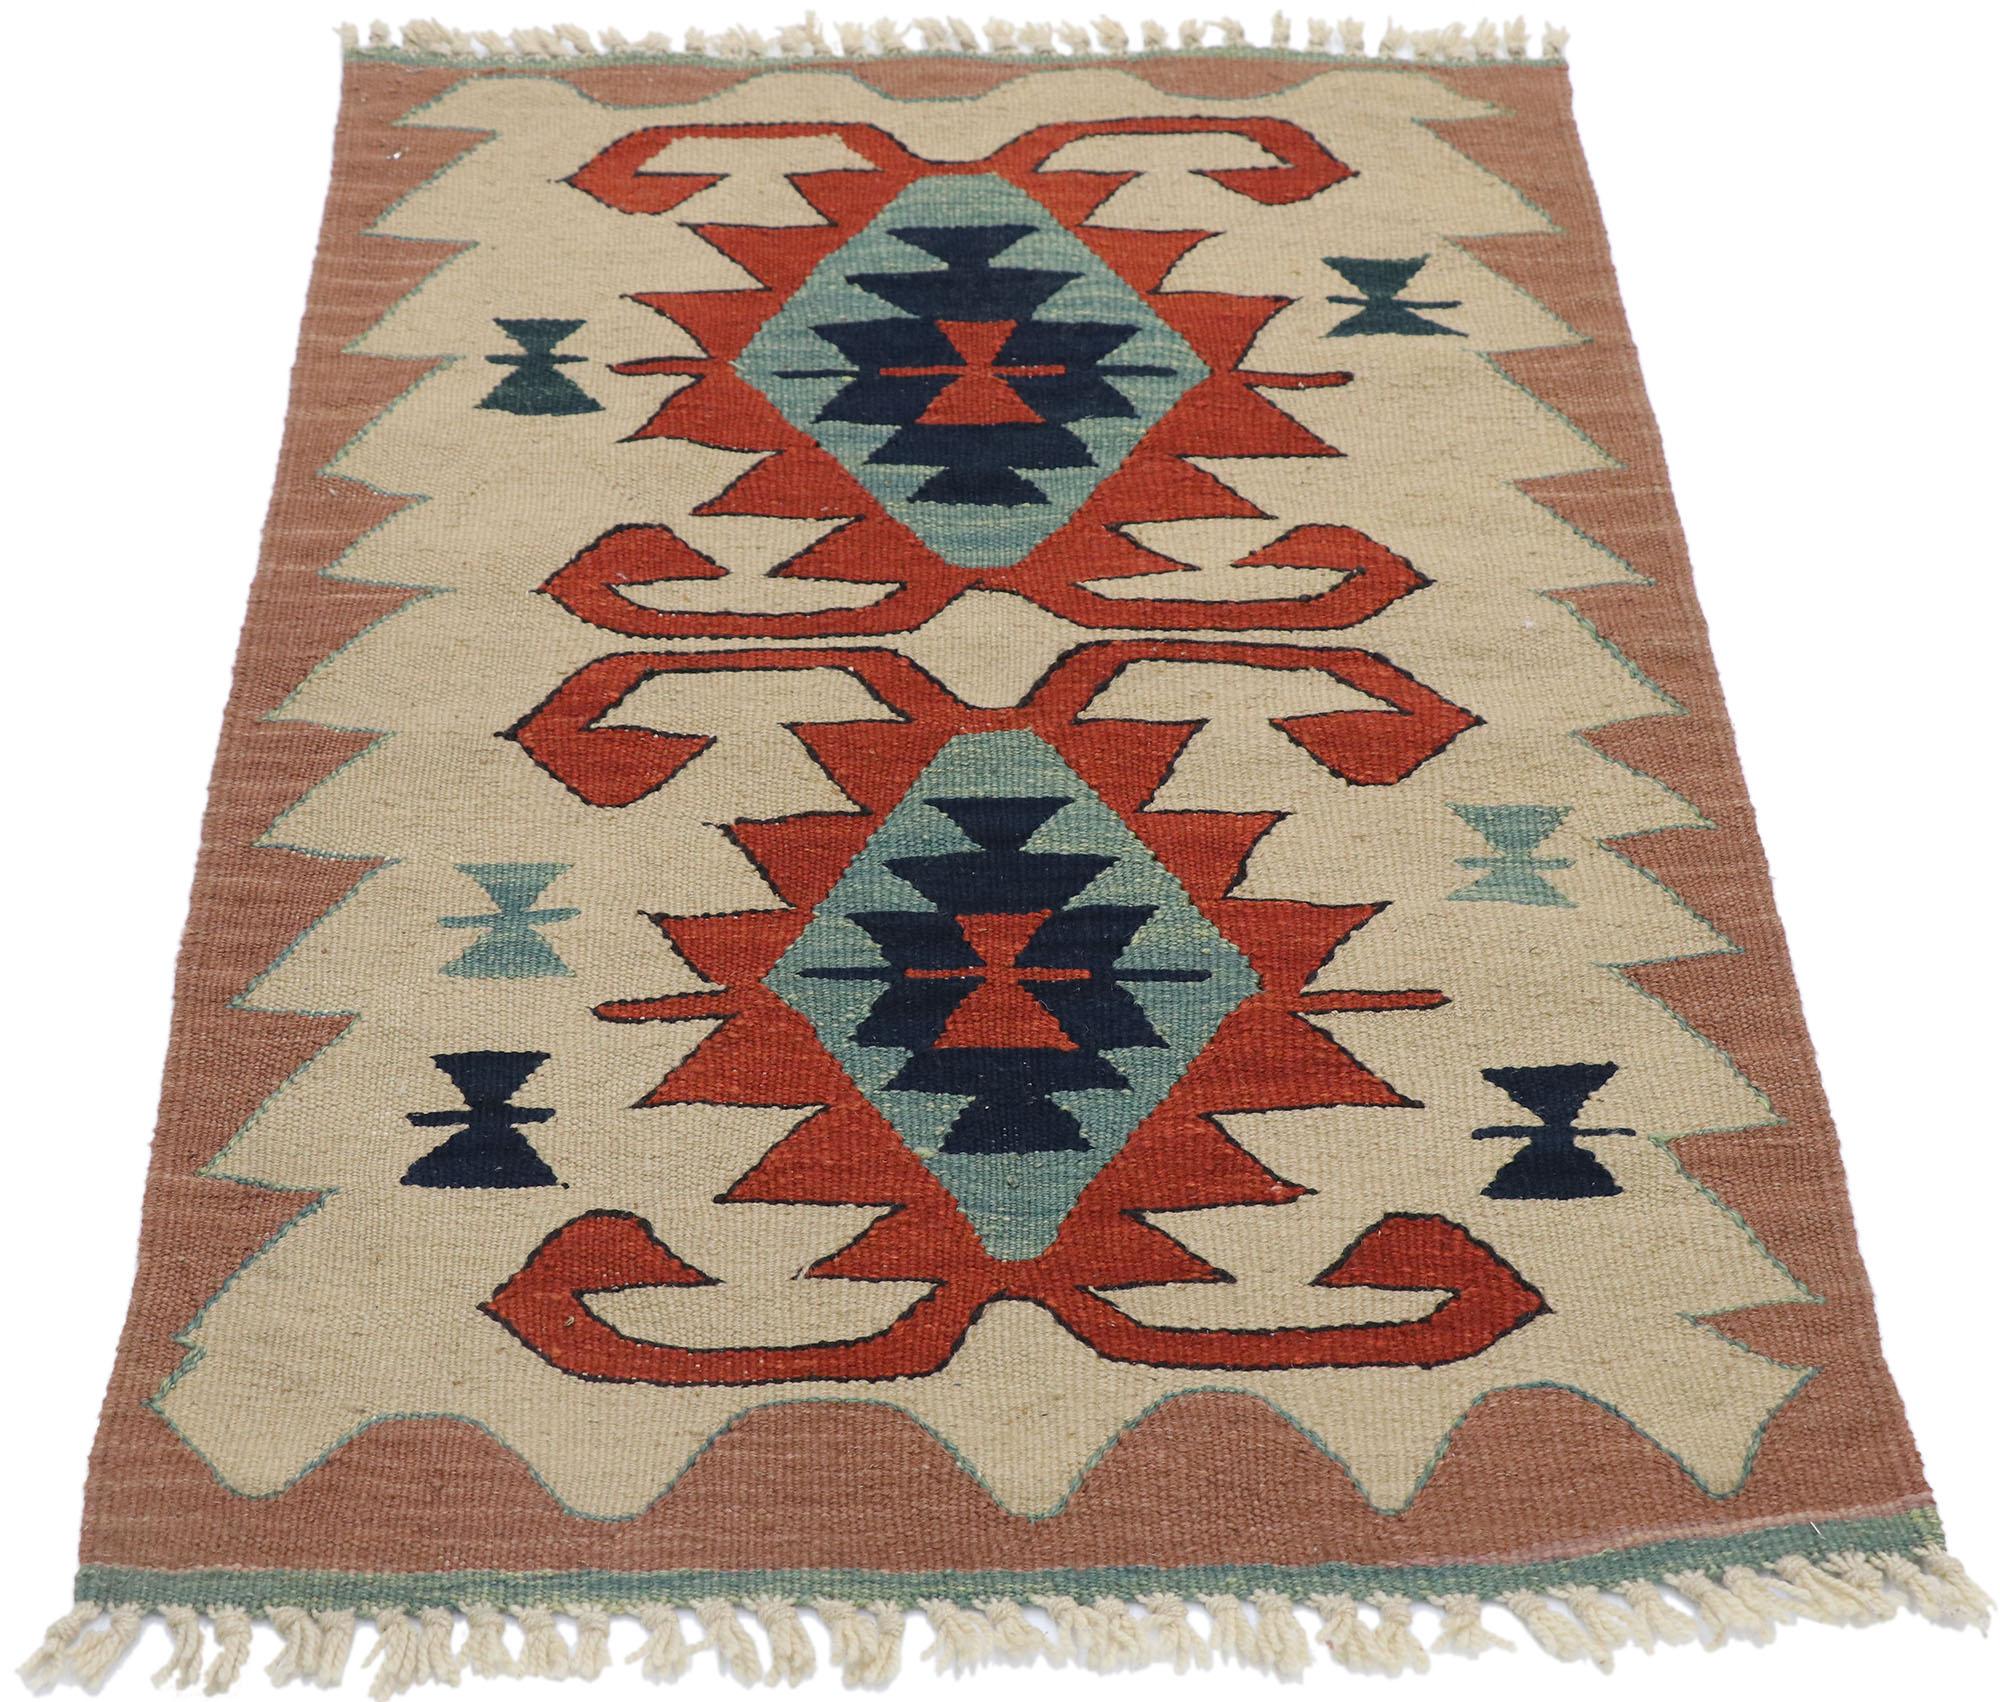 Hand-Woven Vintage Persian Shiraz Kilim Rug, Luxury Lodge Meets Modern Southwest Style For Sale